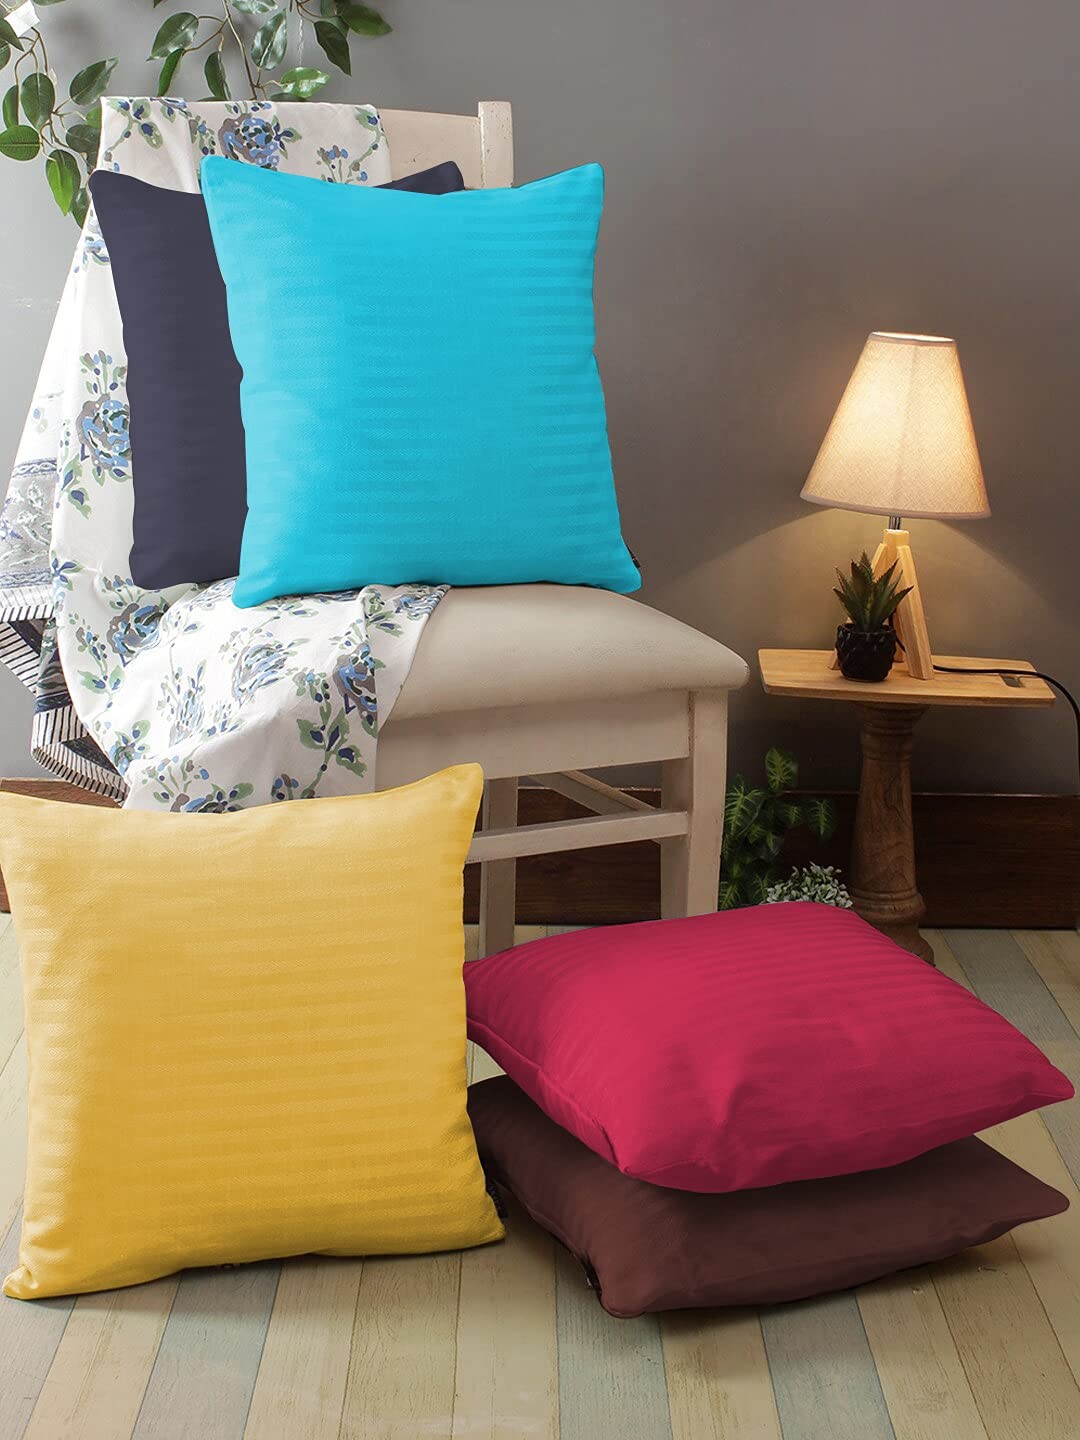 LEARN ABOUT DIFFERENT TYPES OF CUSHION COVERS TO DECORATE YOUR HOME